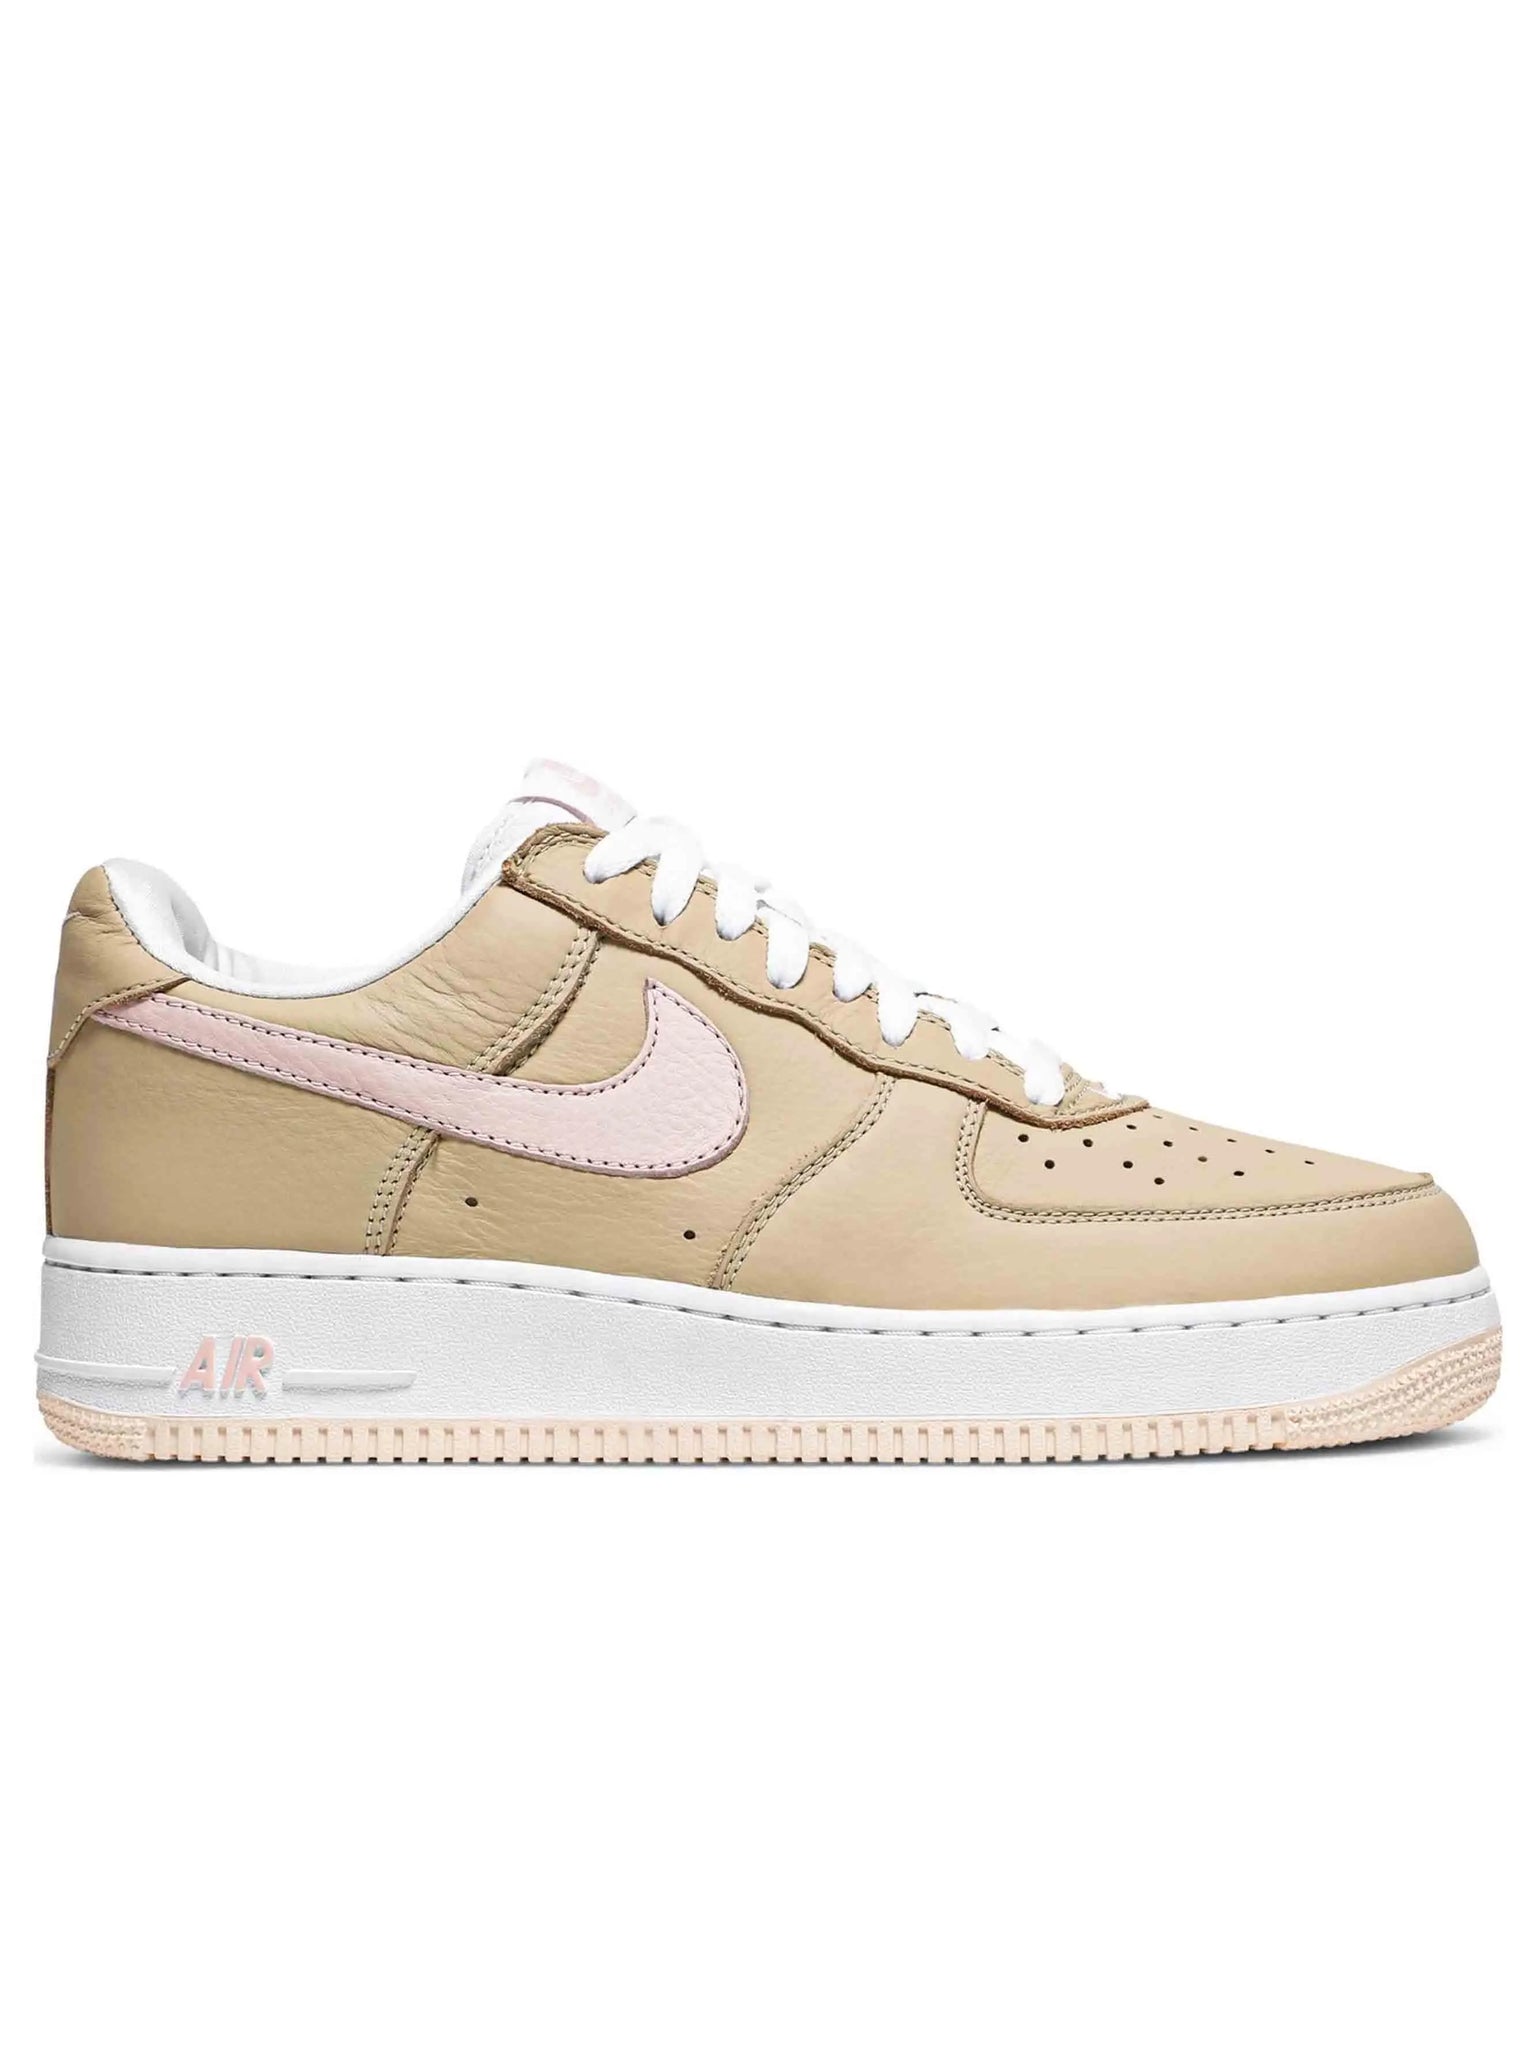 Nike Air Force 1 Low Linen Kith Exclusive Prior